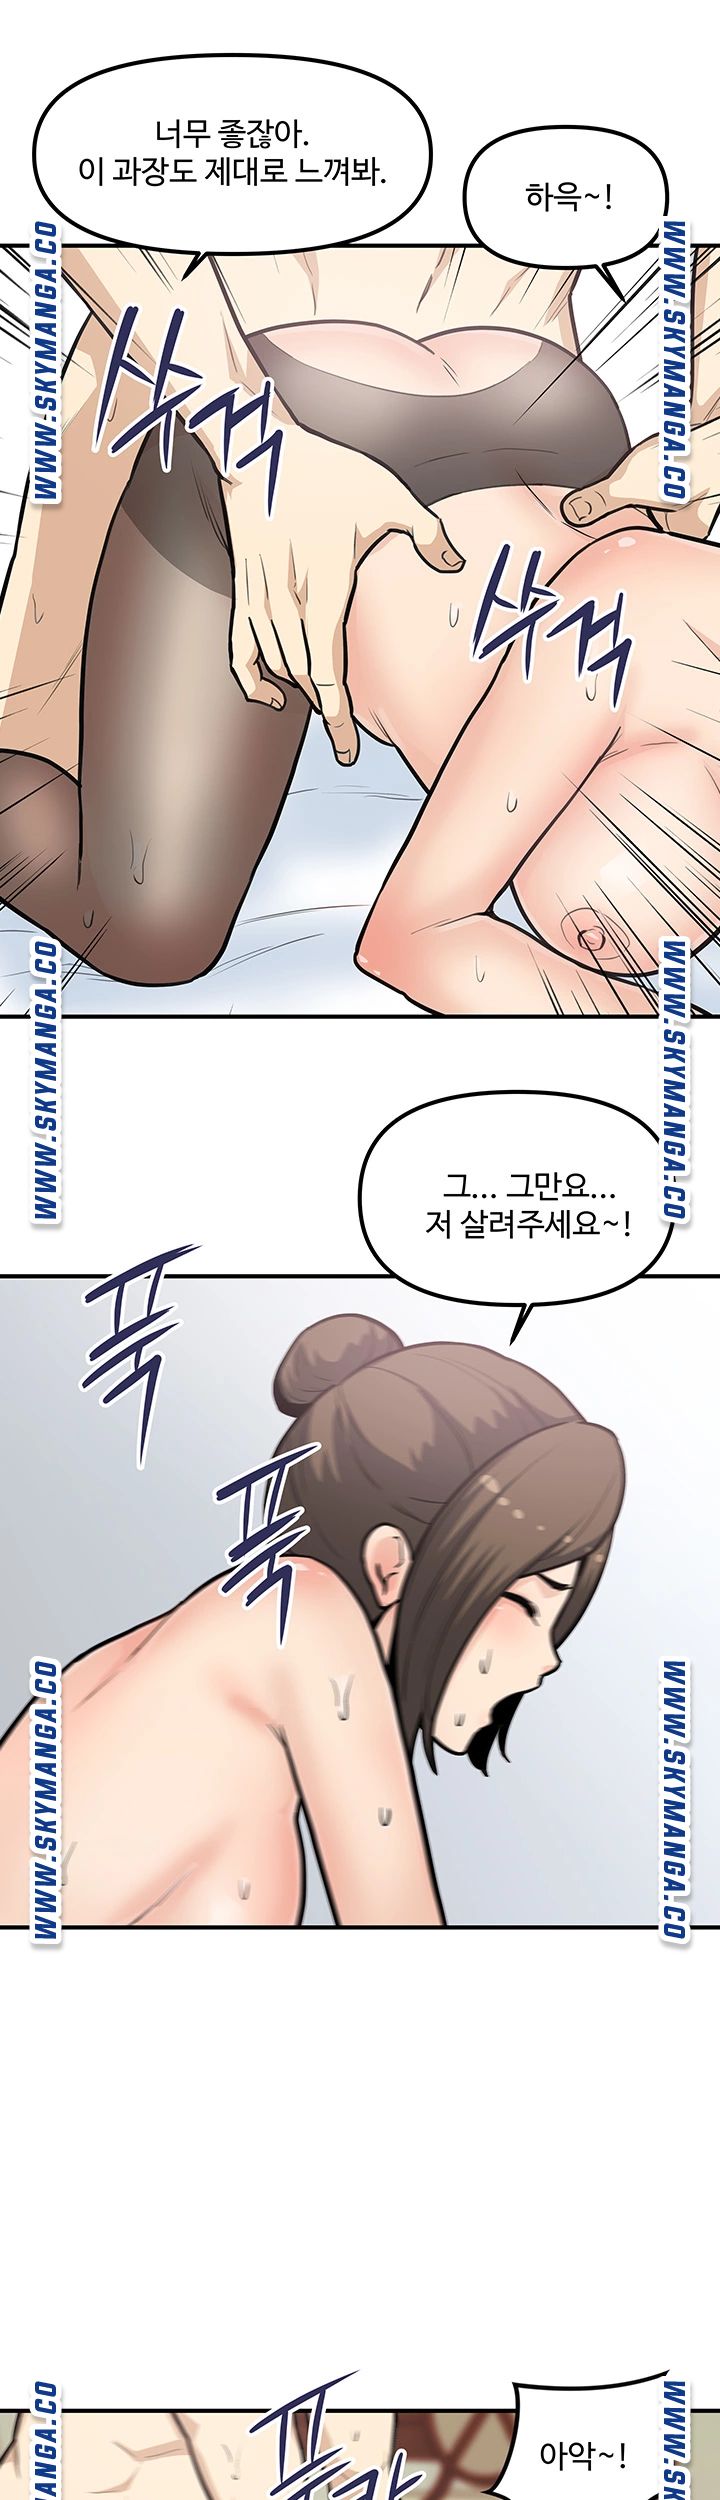 Office Bible Raw - Chapter 26 Page 20